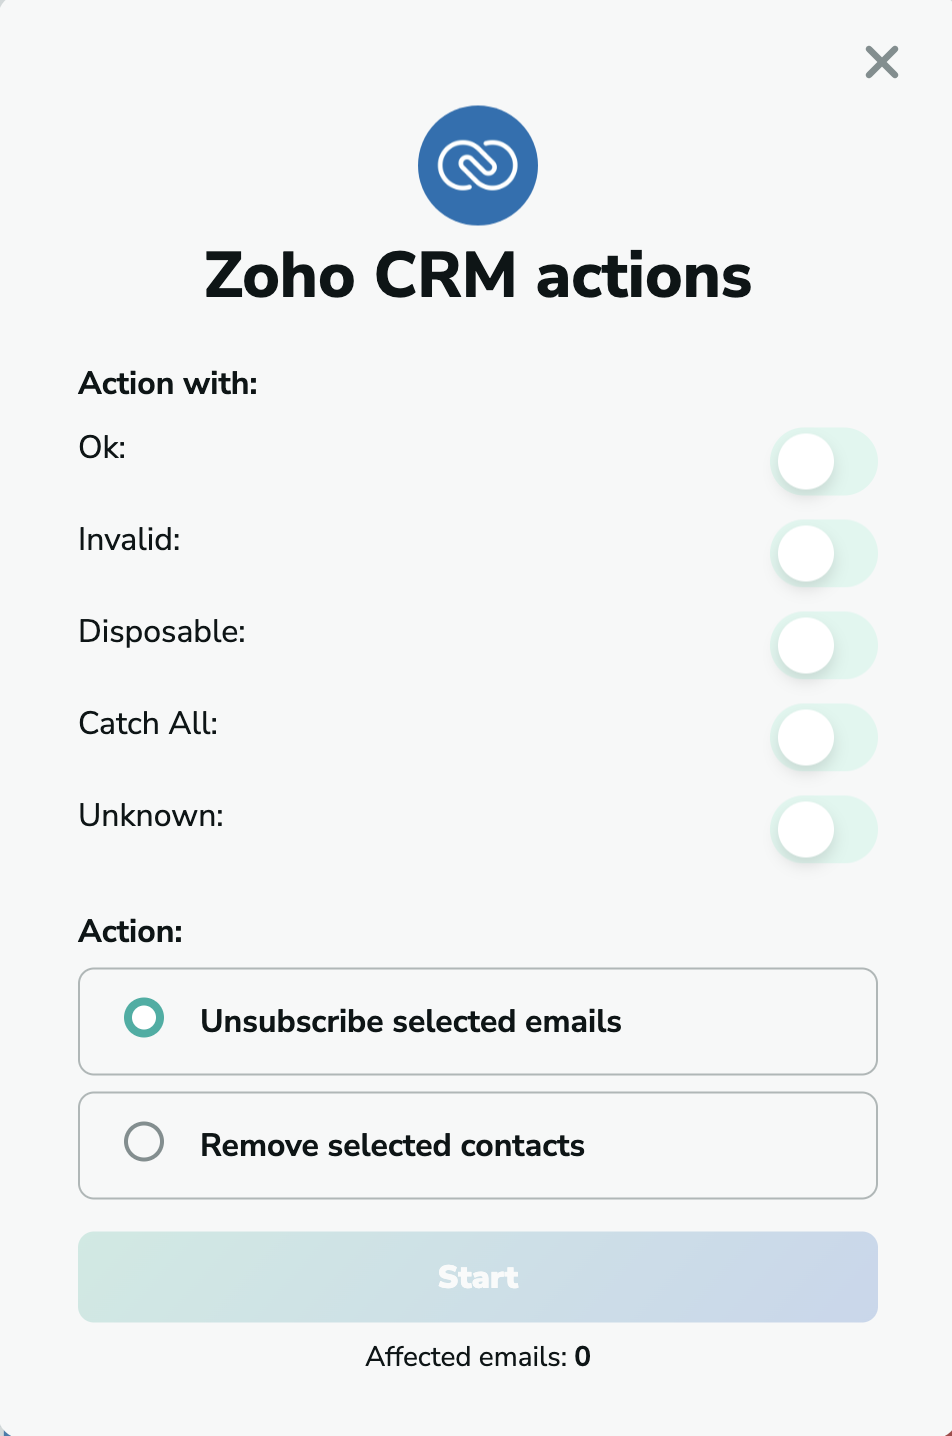 Zoho CRM actions in MillionVerifier